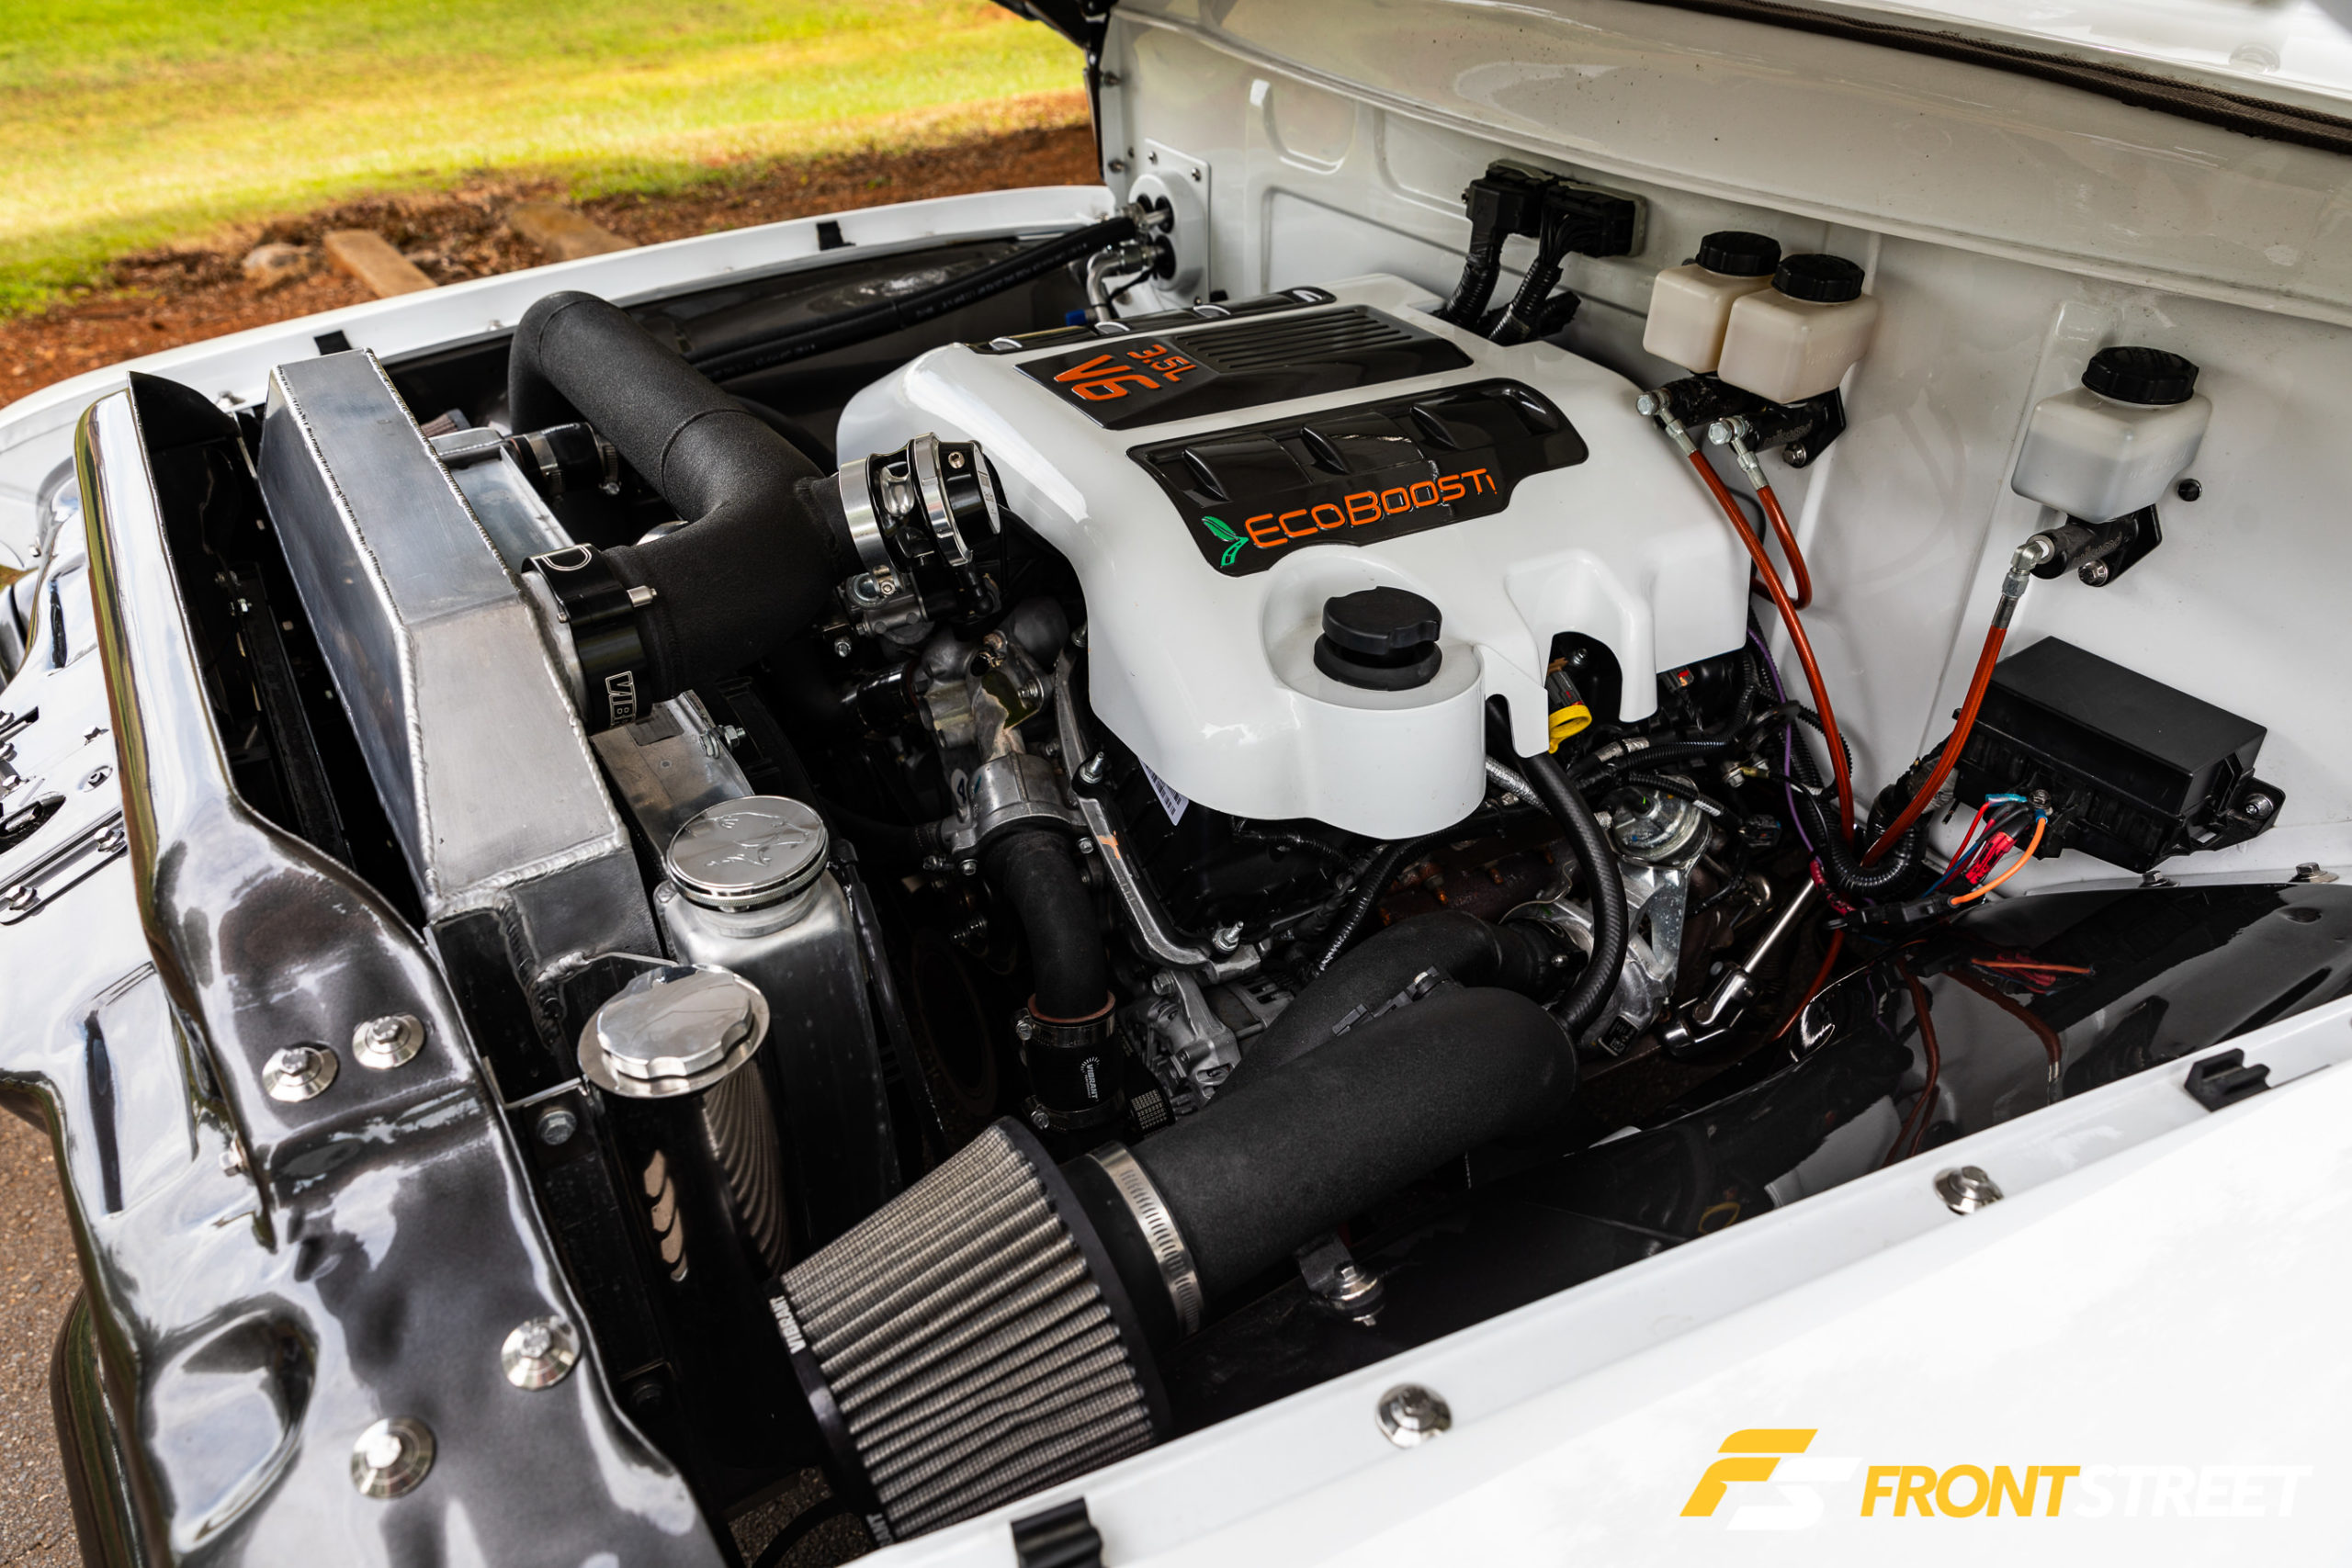 There's A Secret Lurking Under The Hood Of This Fat Fender Ford F-100